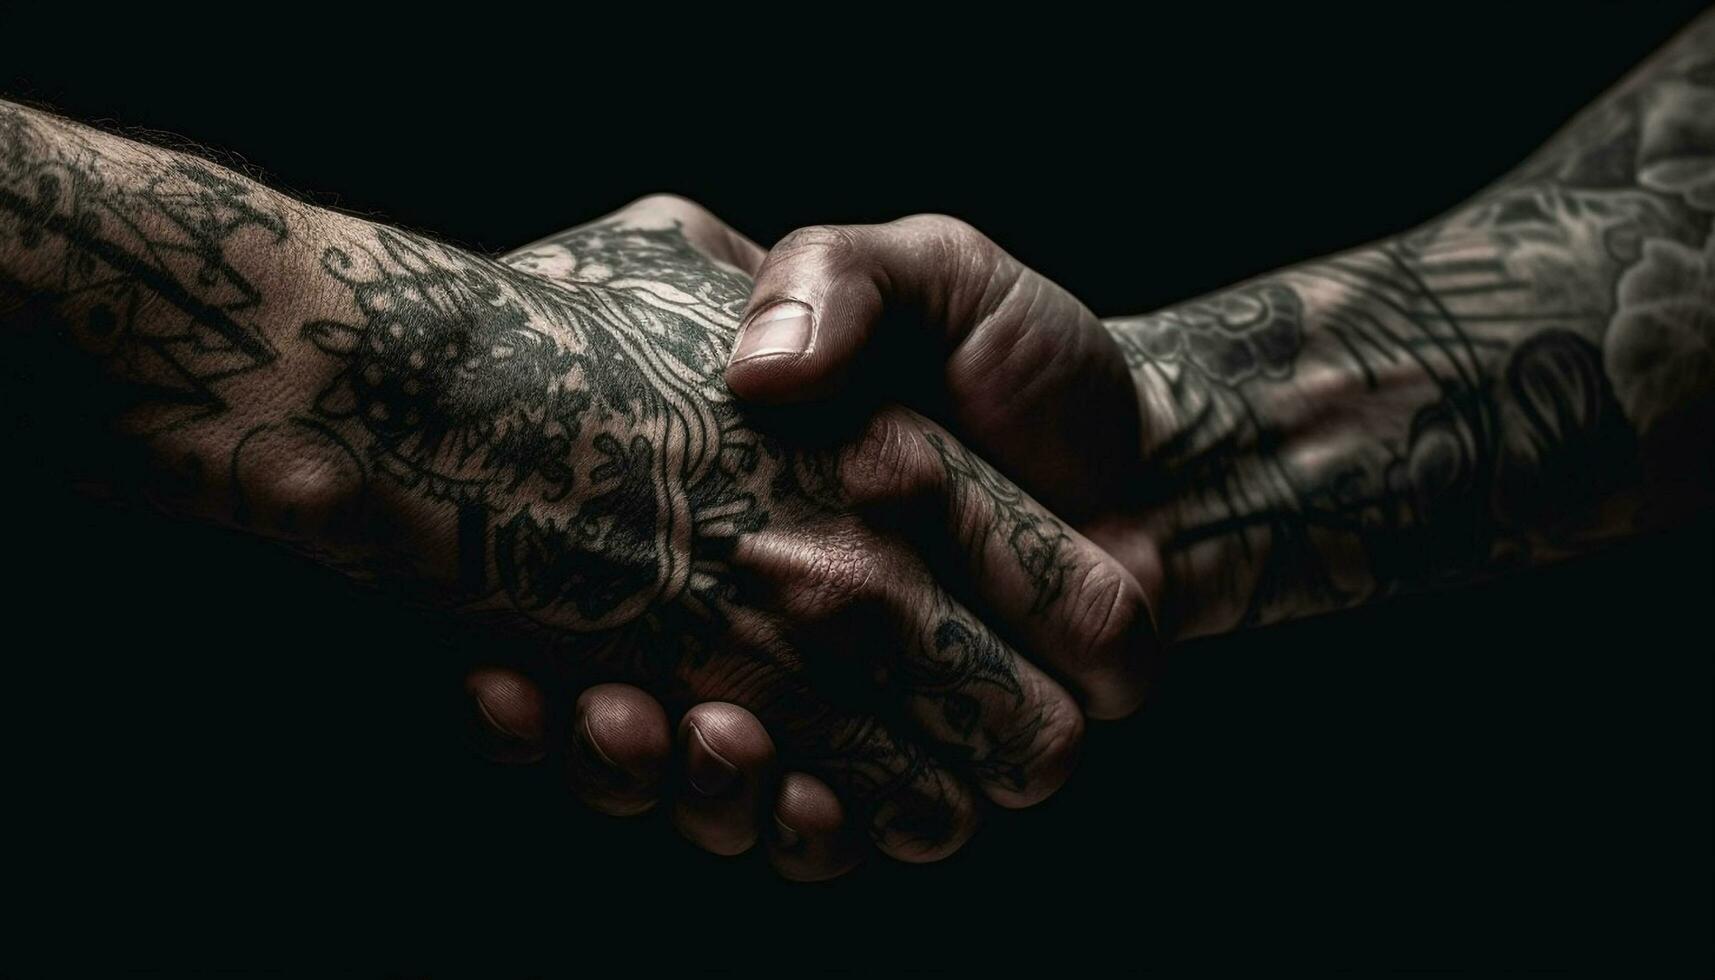 Black ink embraces beauty in henna tattoo design generated by AI photo